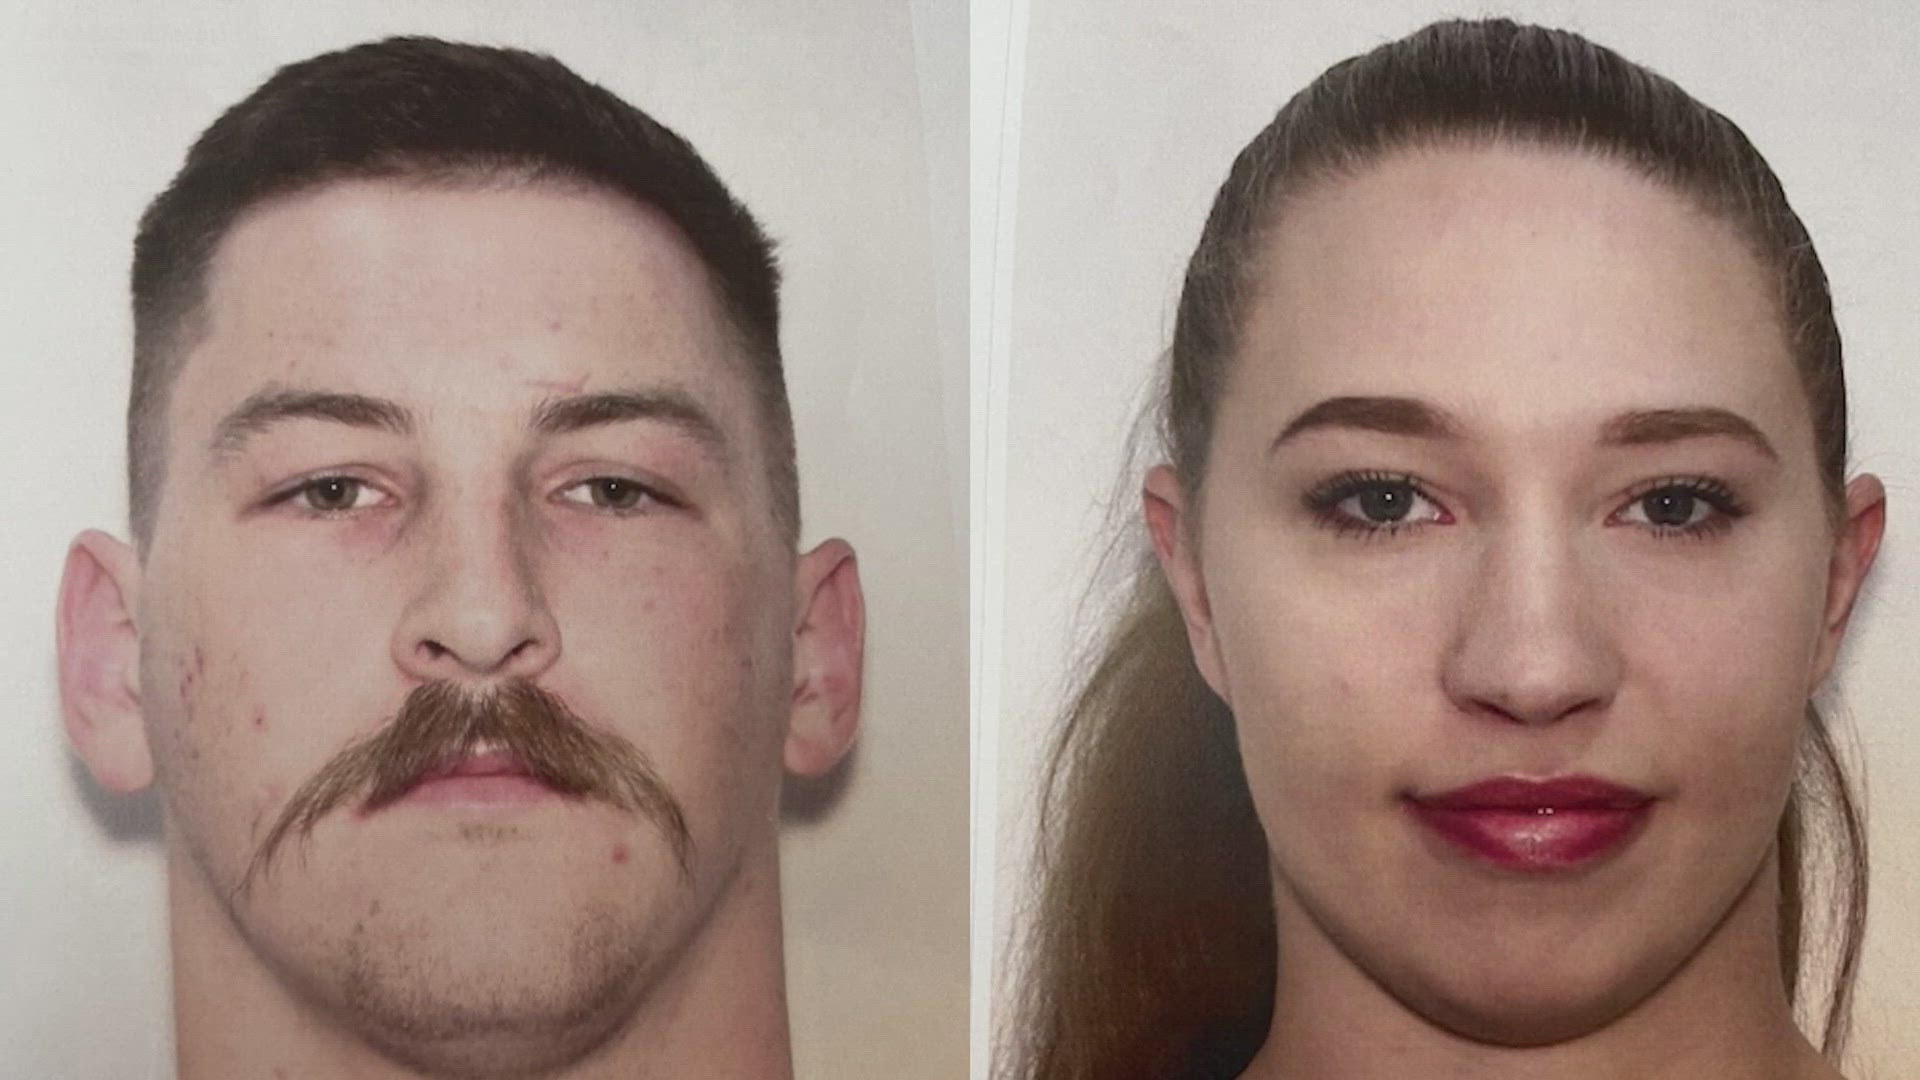 The bodies of Raegan Anderson and Chandler Kuhbander have been sent for autopsy to determine the cause and manner of death, according to the Cocke County Sheriff.